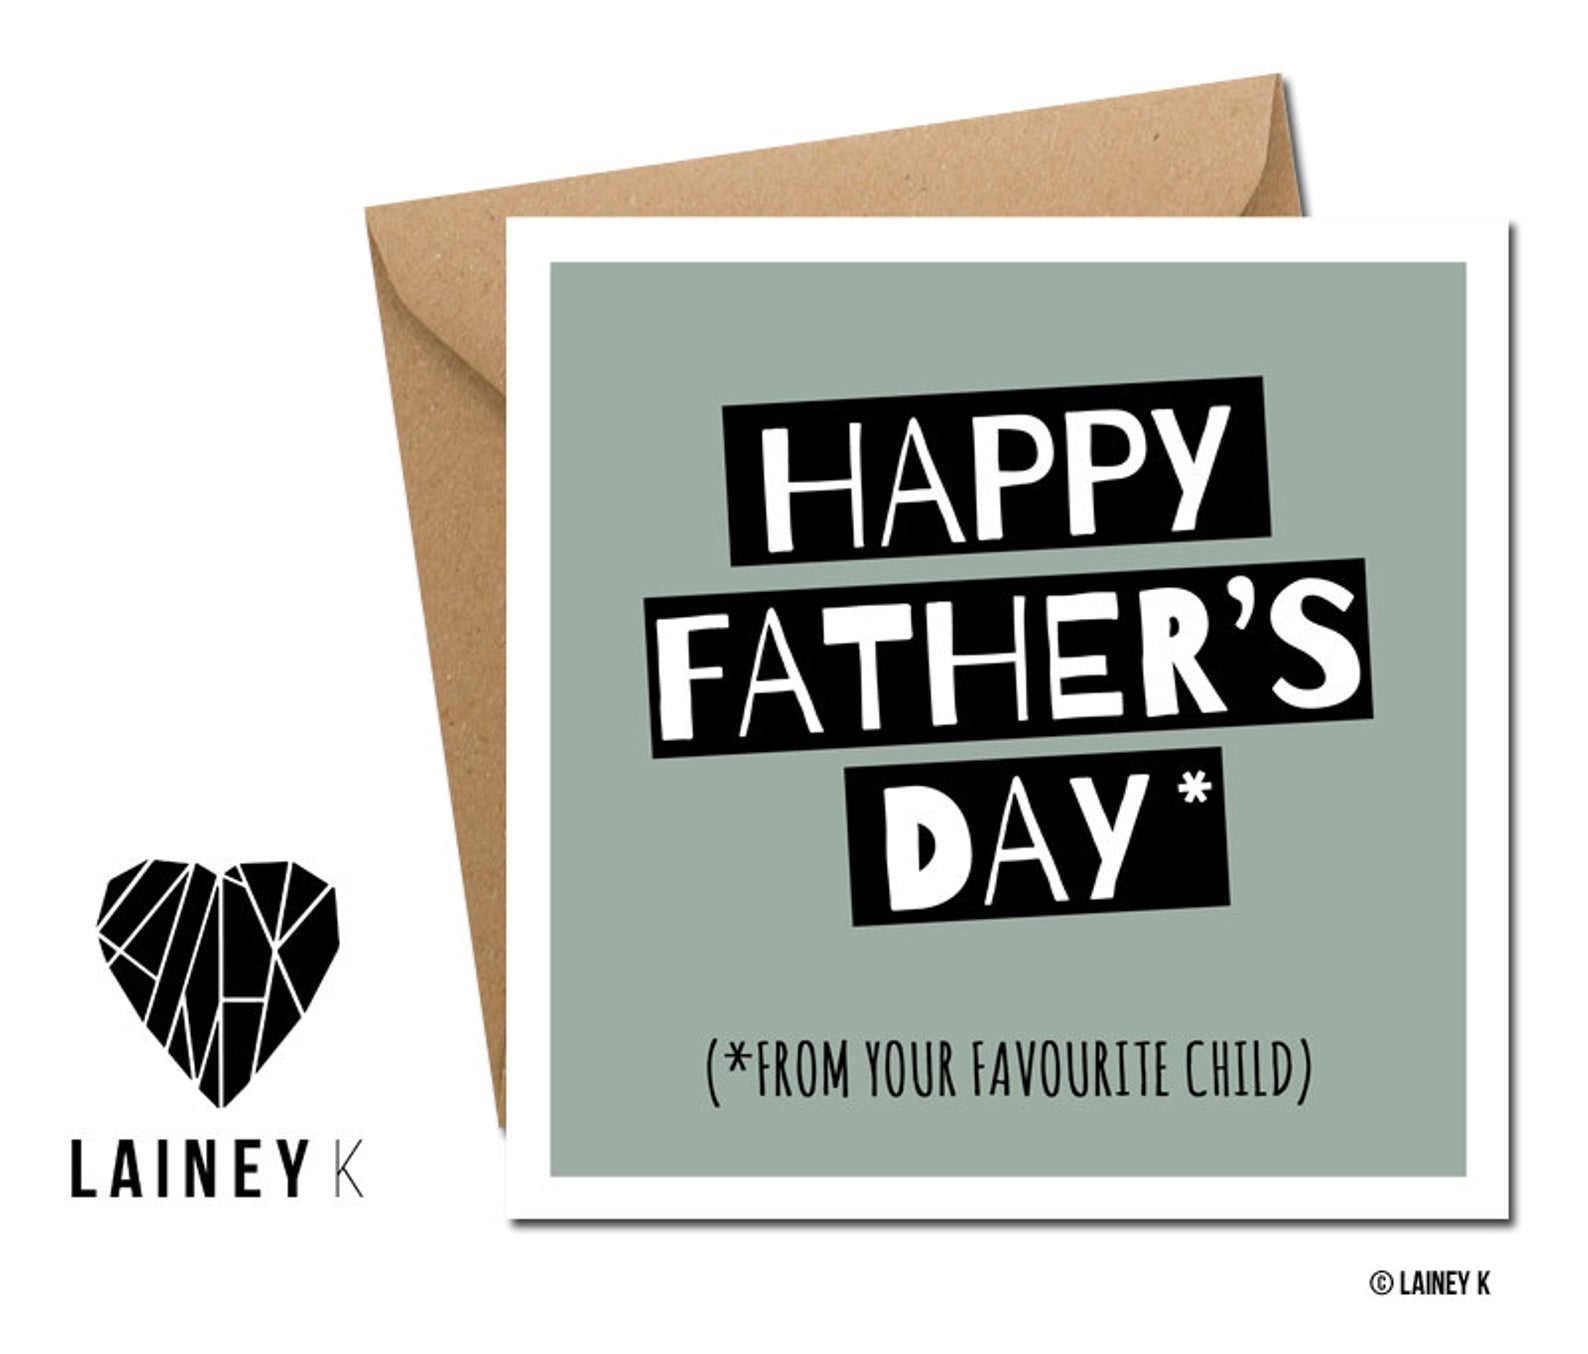 Happy Father's Day ** From Your Favourite Child (Greeting Card)